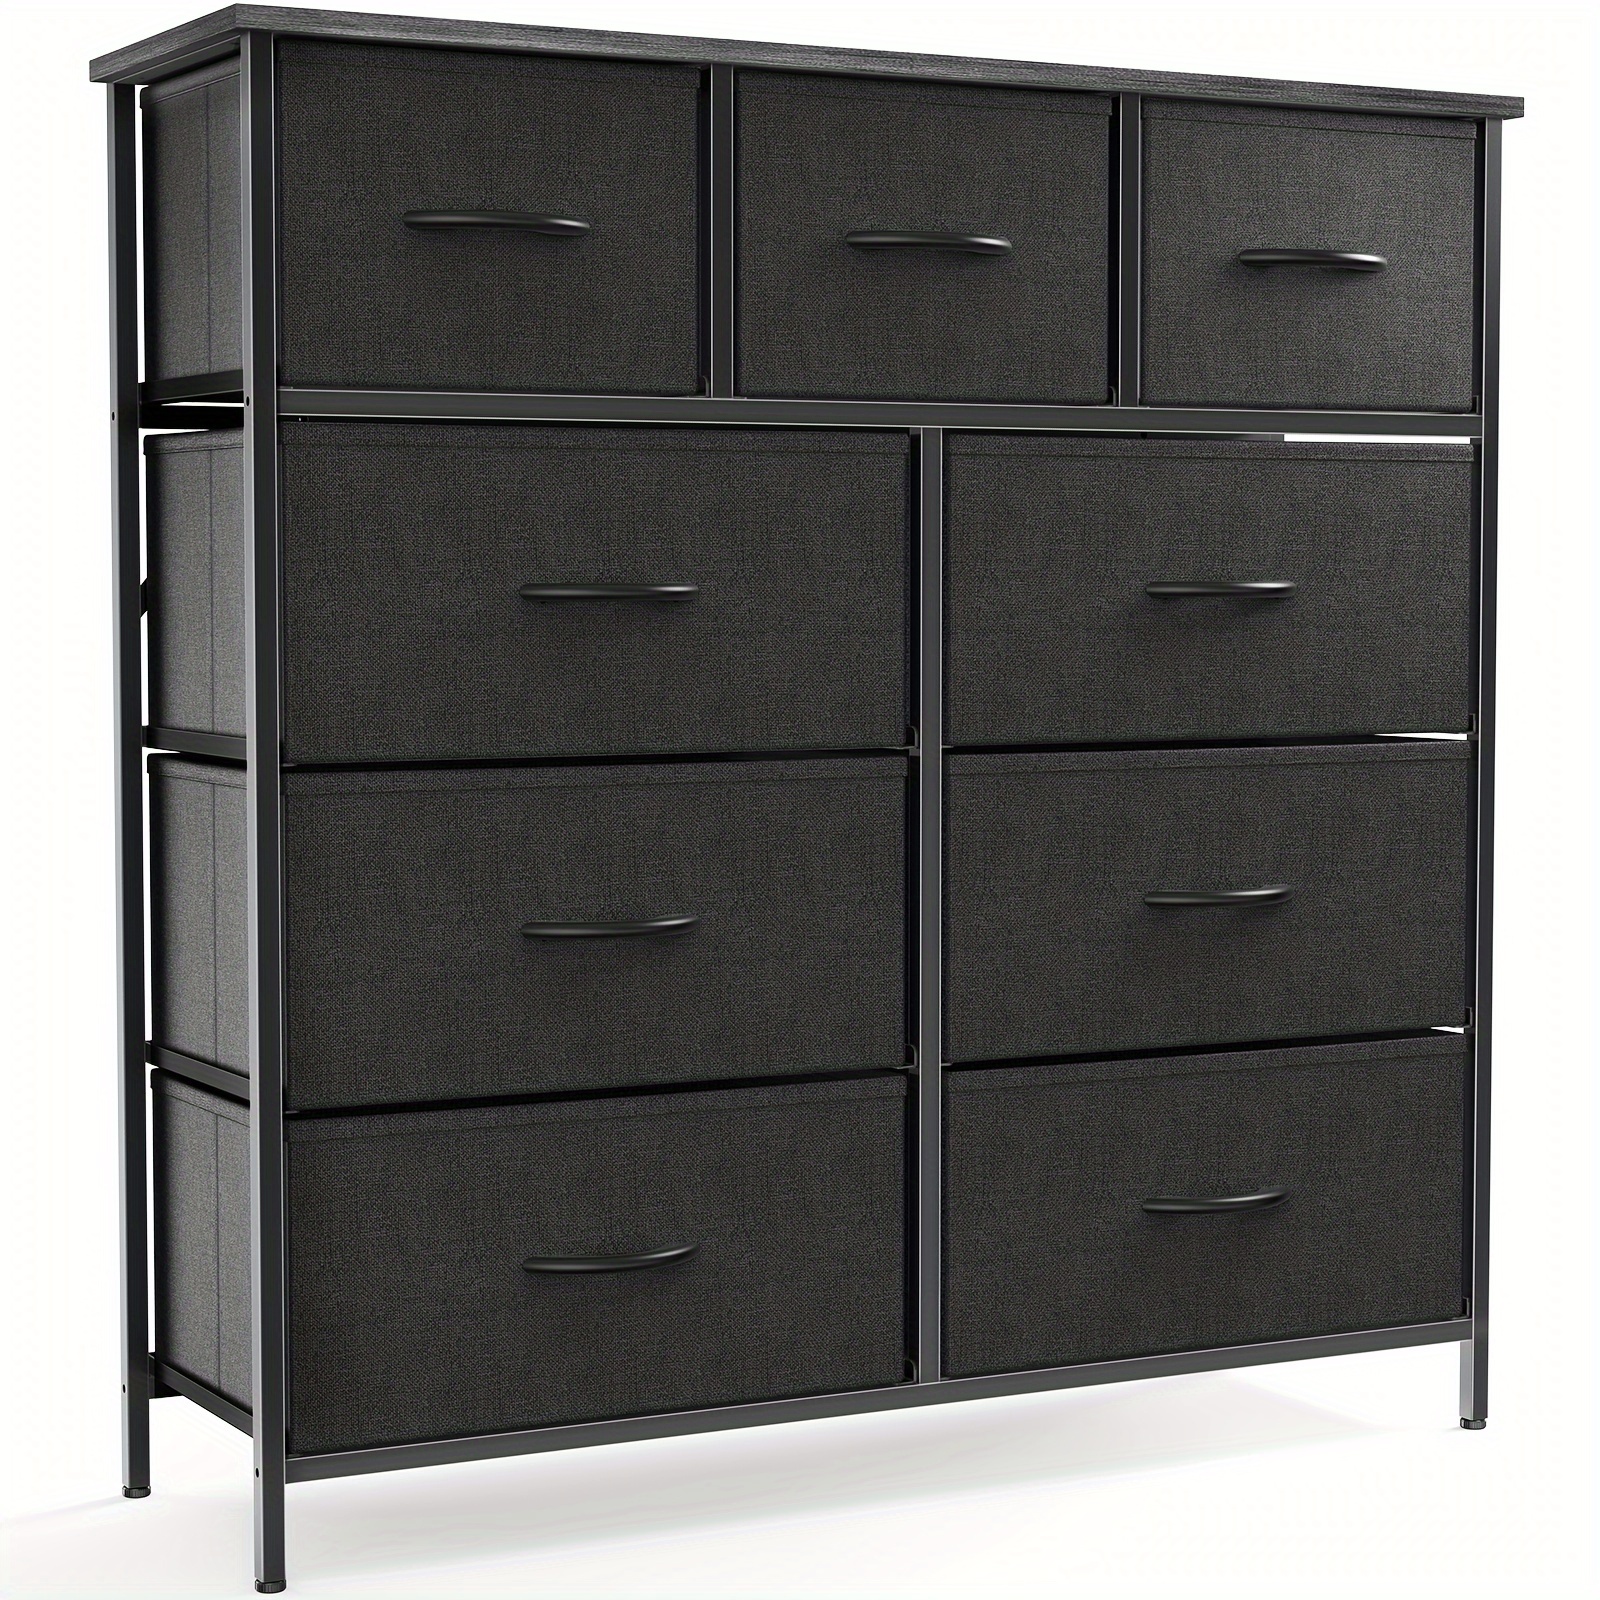 

Dresser For Bedroom With 9 Drawers Fabric Storage Tower, Organizer Unit For Living Room, Hallway, Closets & Nursery - Sturdy Steel Frame, Wooden Top & Anti-tilt Function